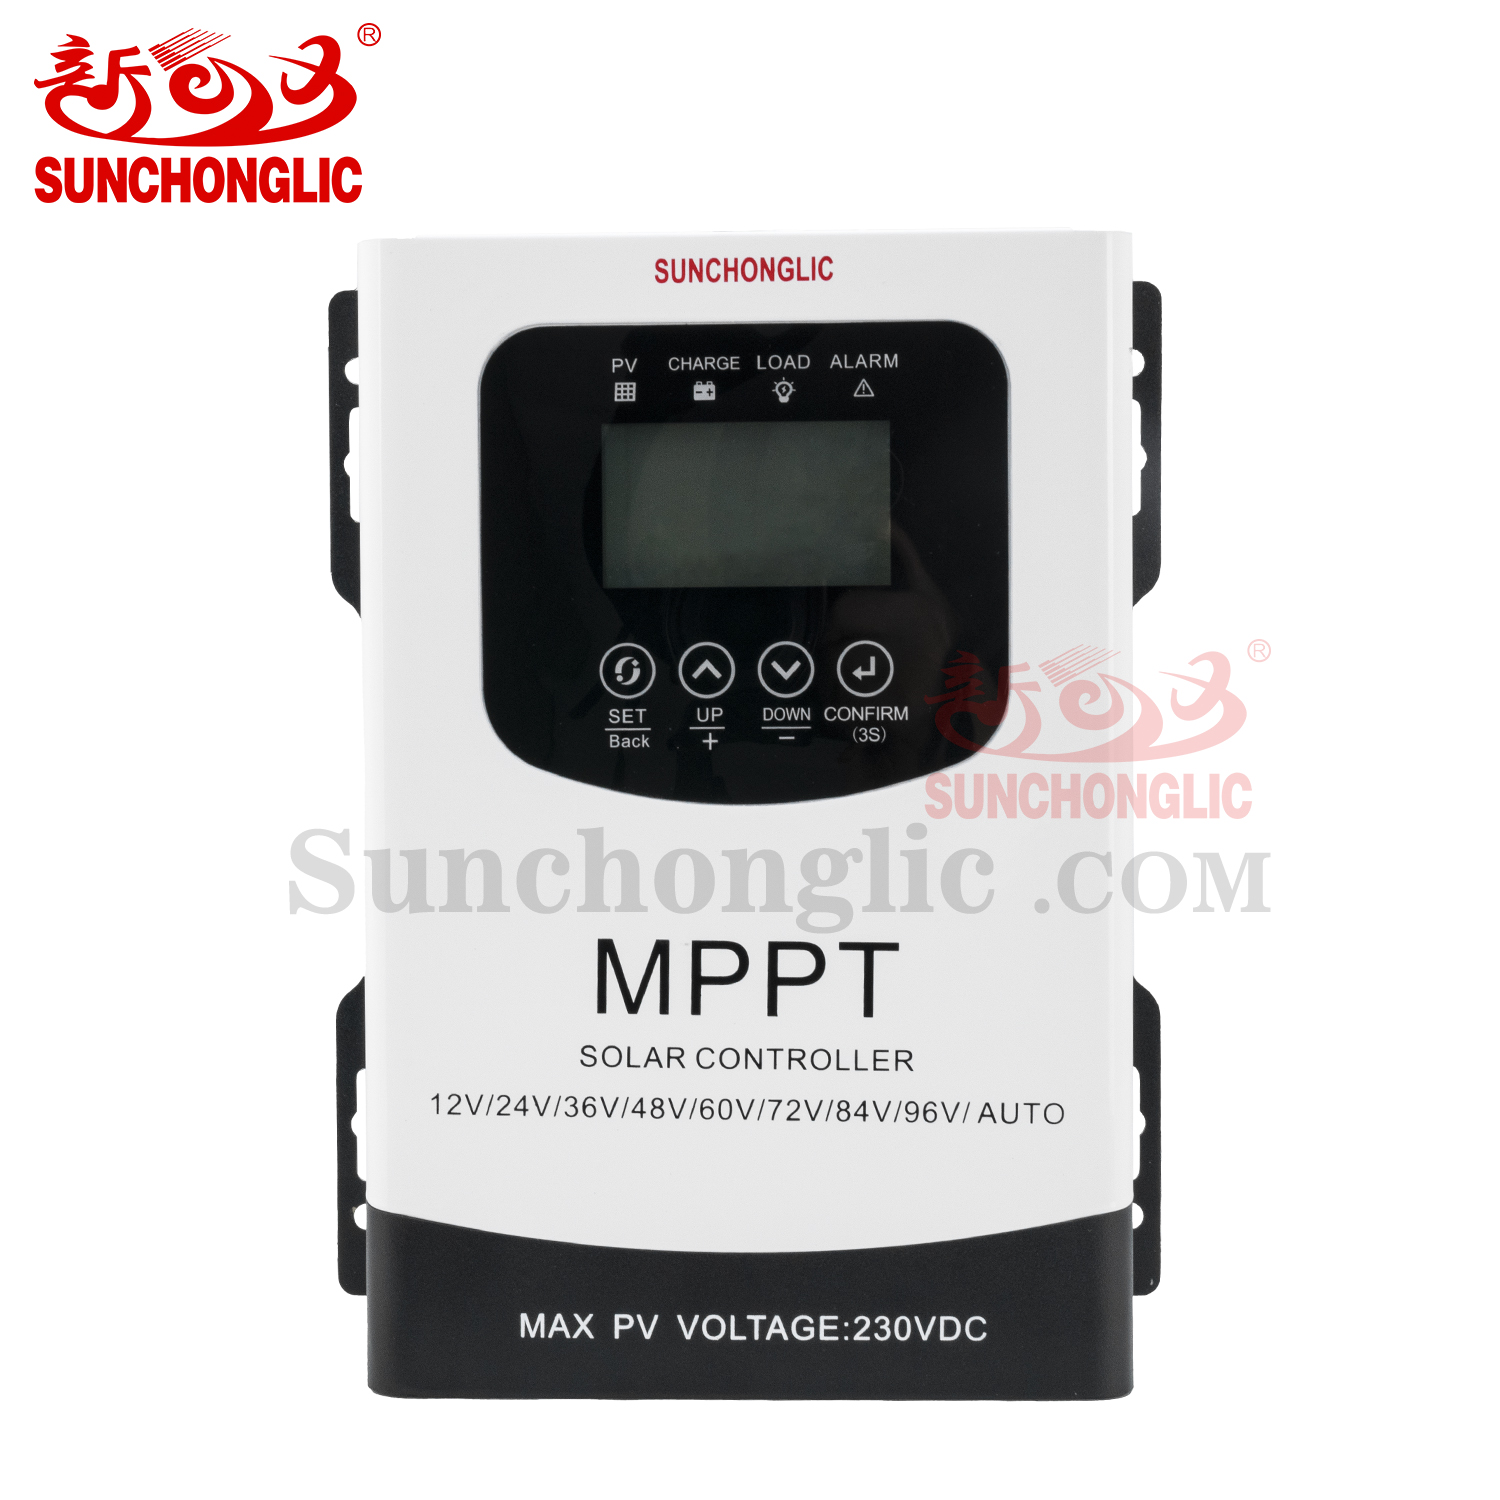 MPPT Solar Charge Controller - MPPT 60A